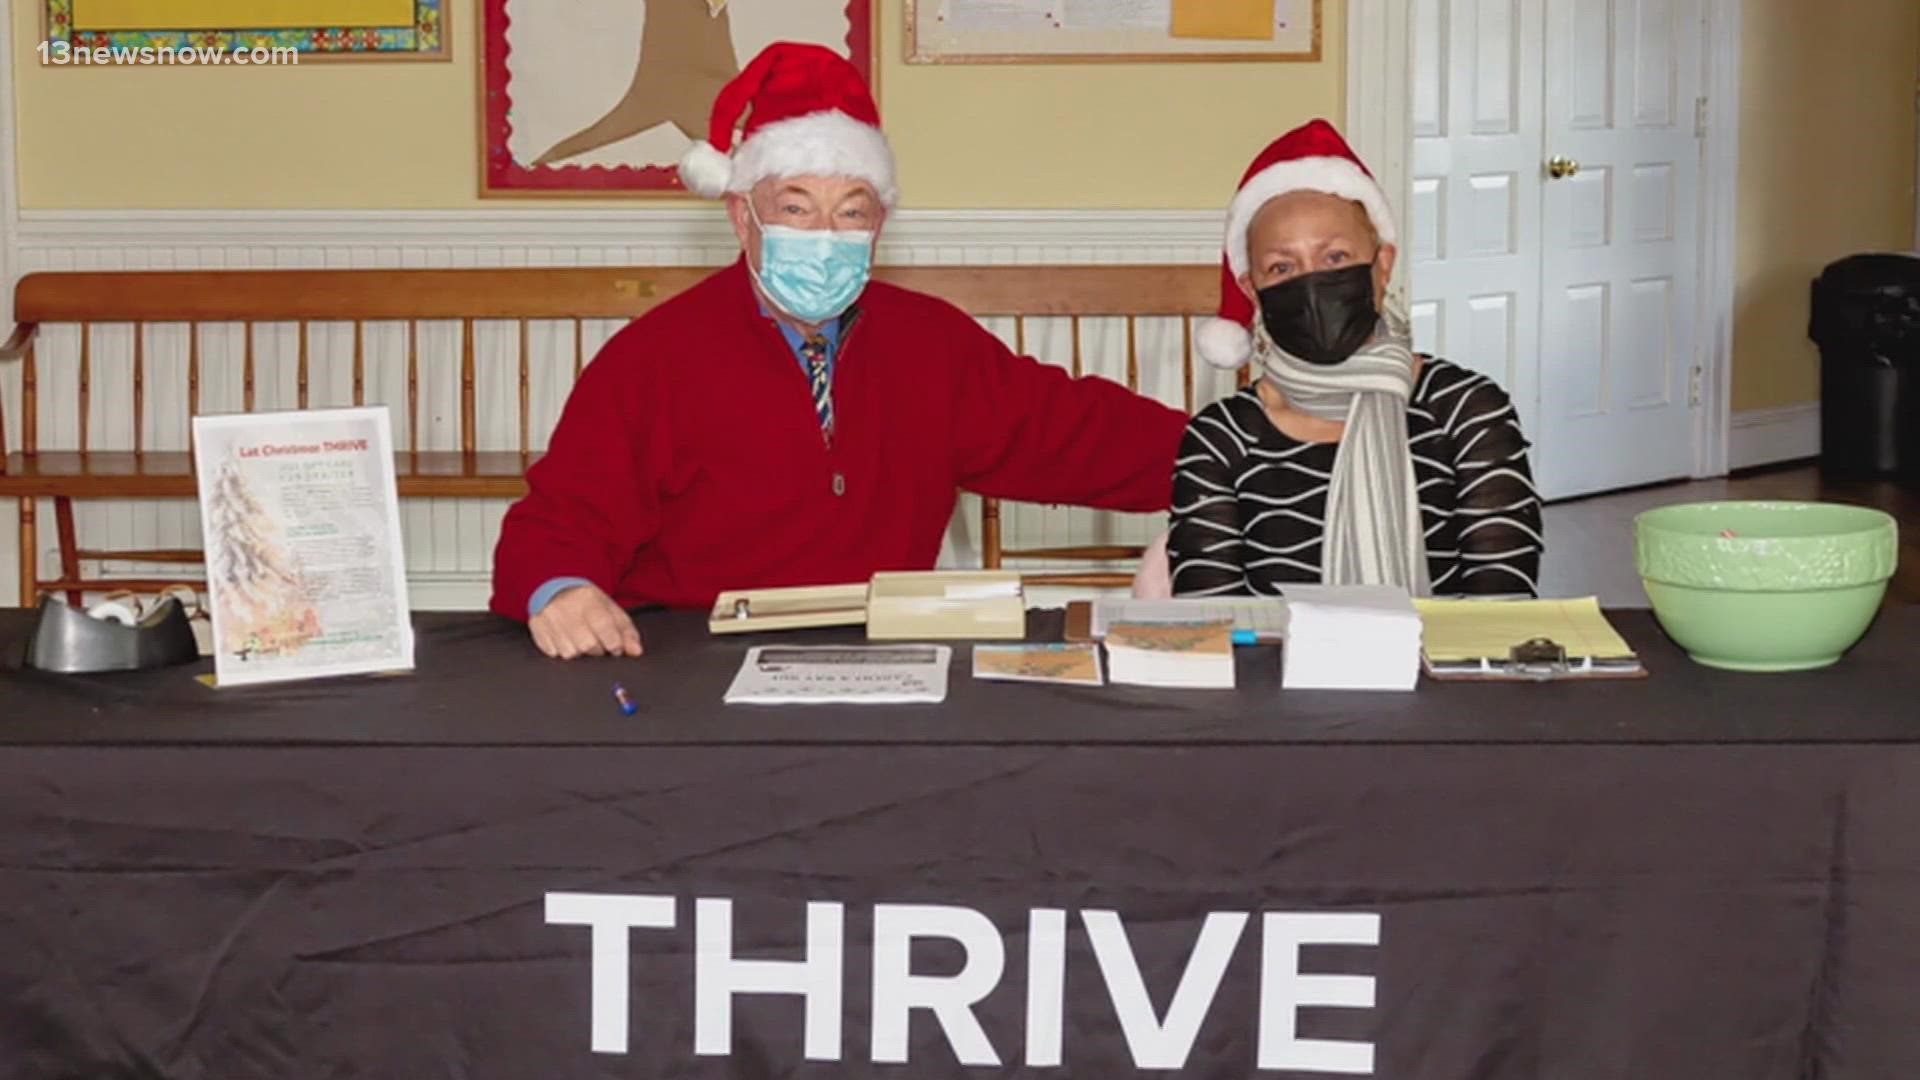 Thrive Peninsula, a nonprofit group based in Newport News is helping families buy presents this holiday season if they cannot afford to.